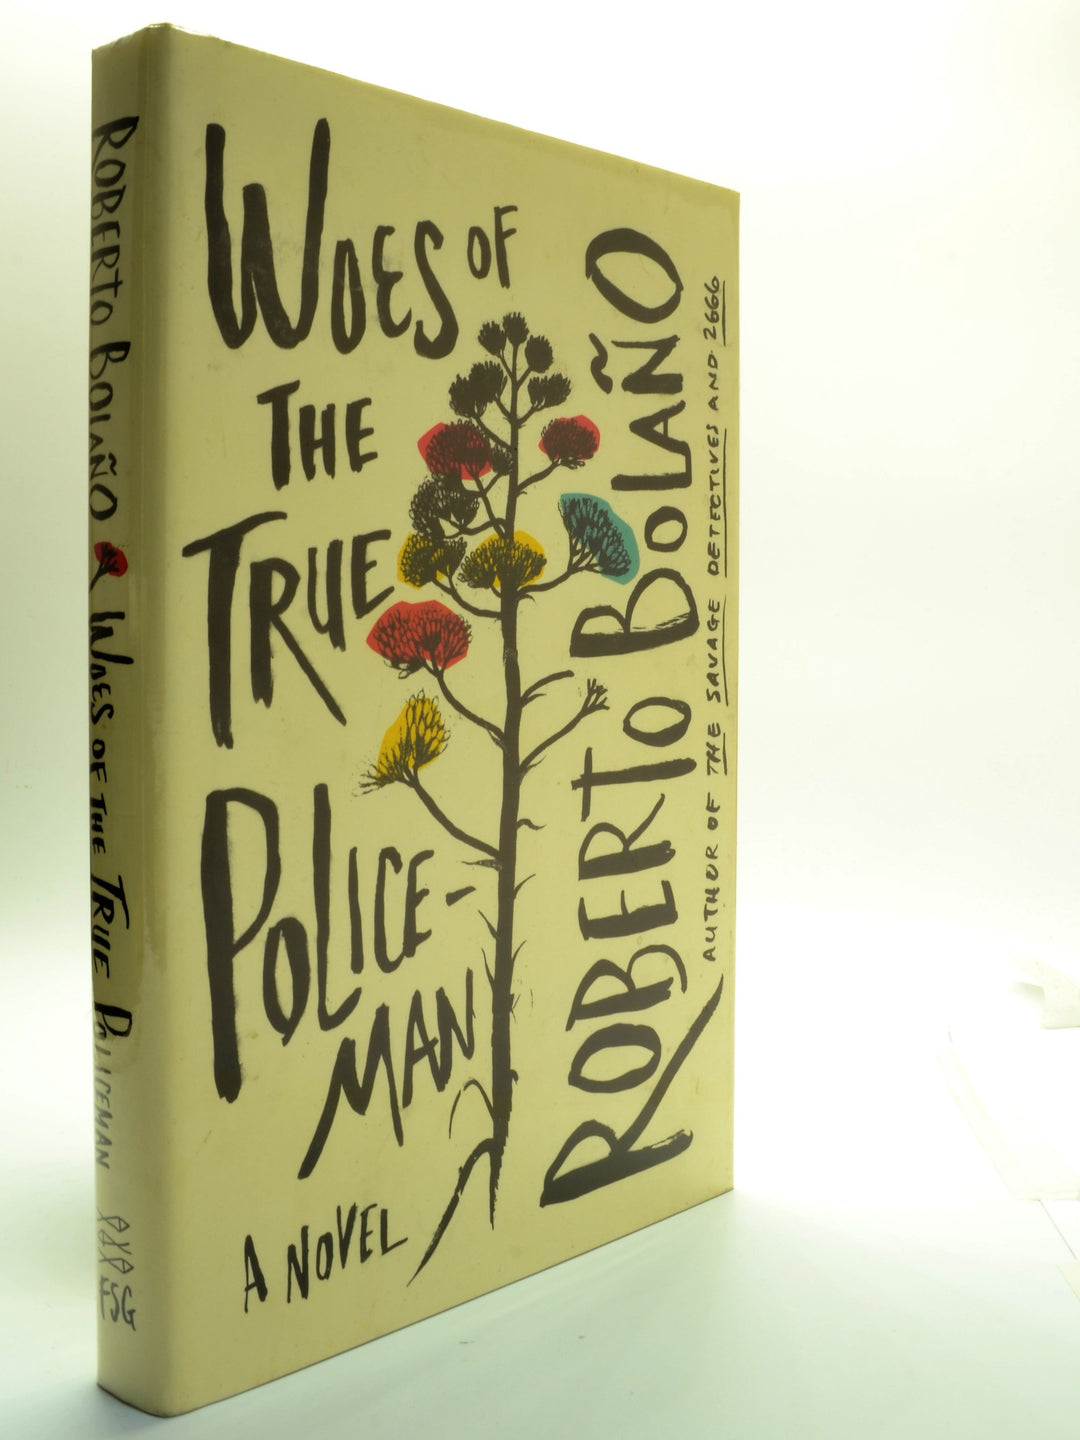 Bolano, Roberto - Woes of the True Policeman | back cover